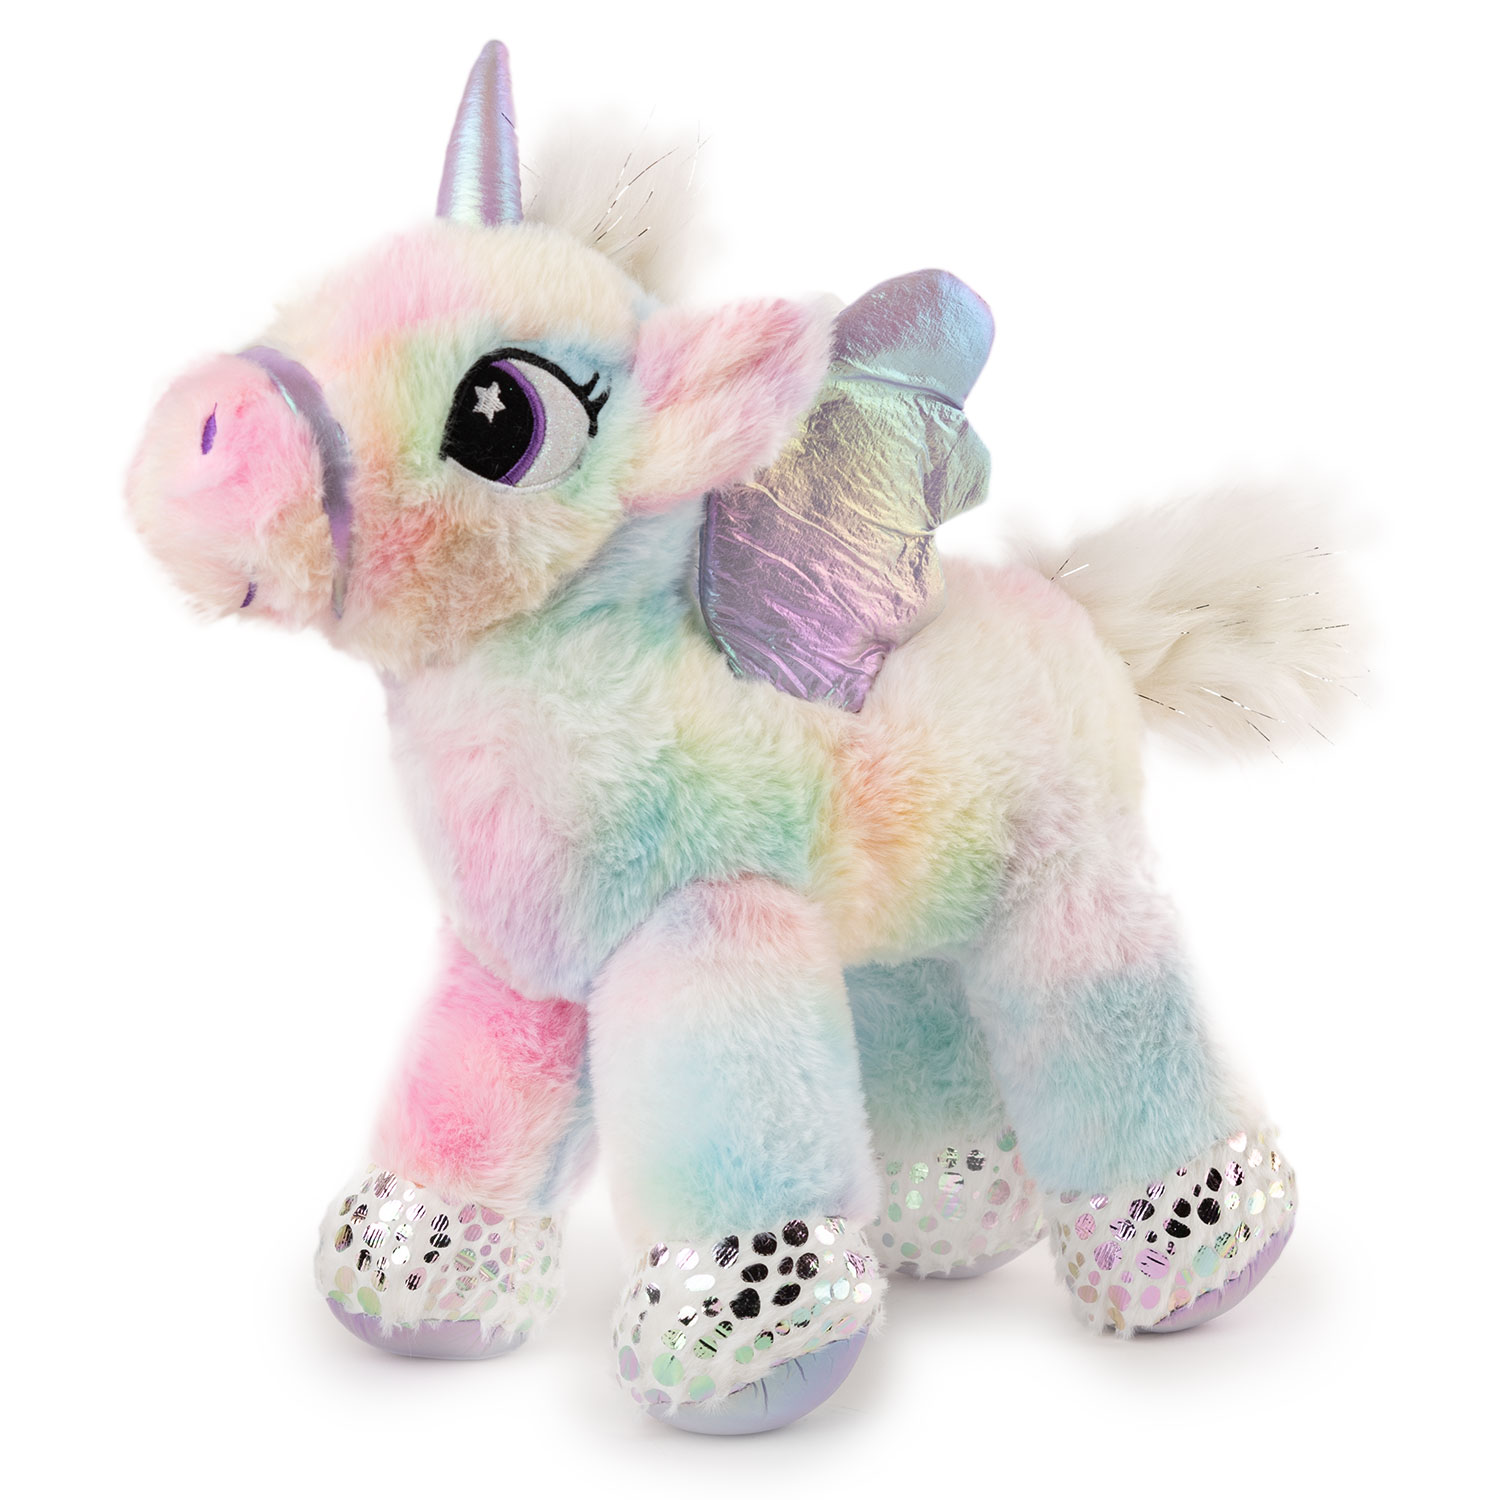 Unicorn with glitter wings - Colorful